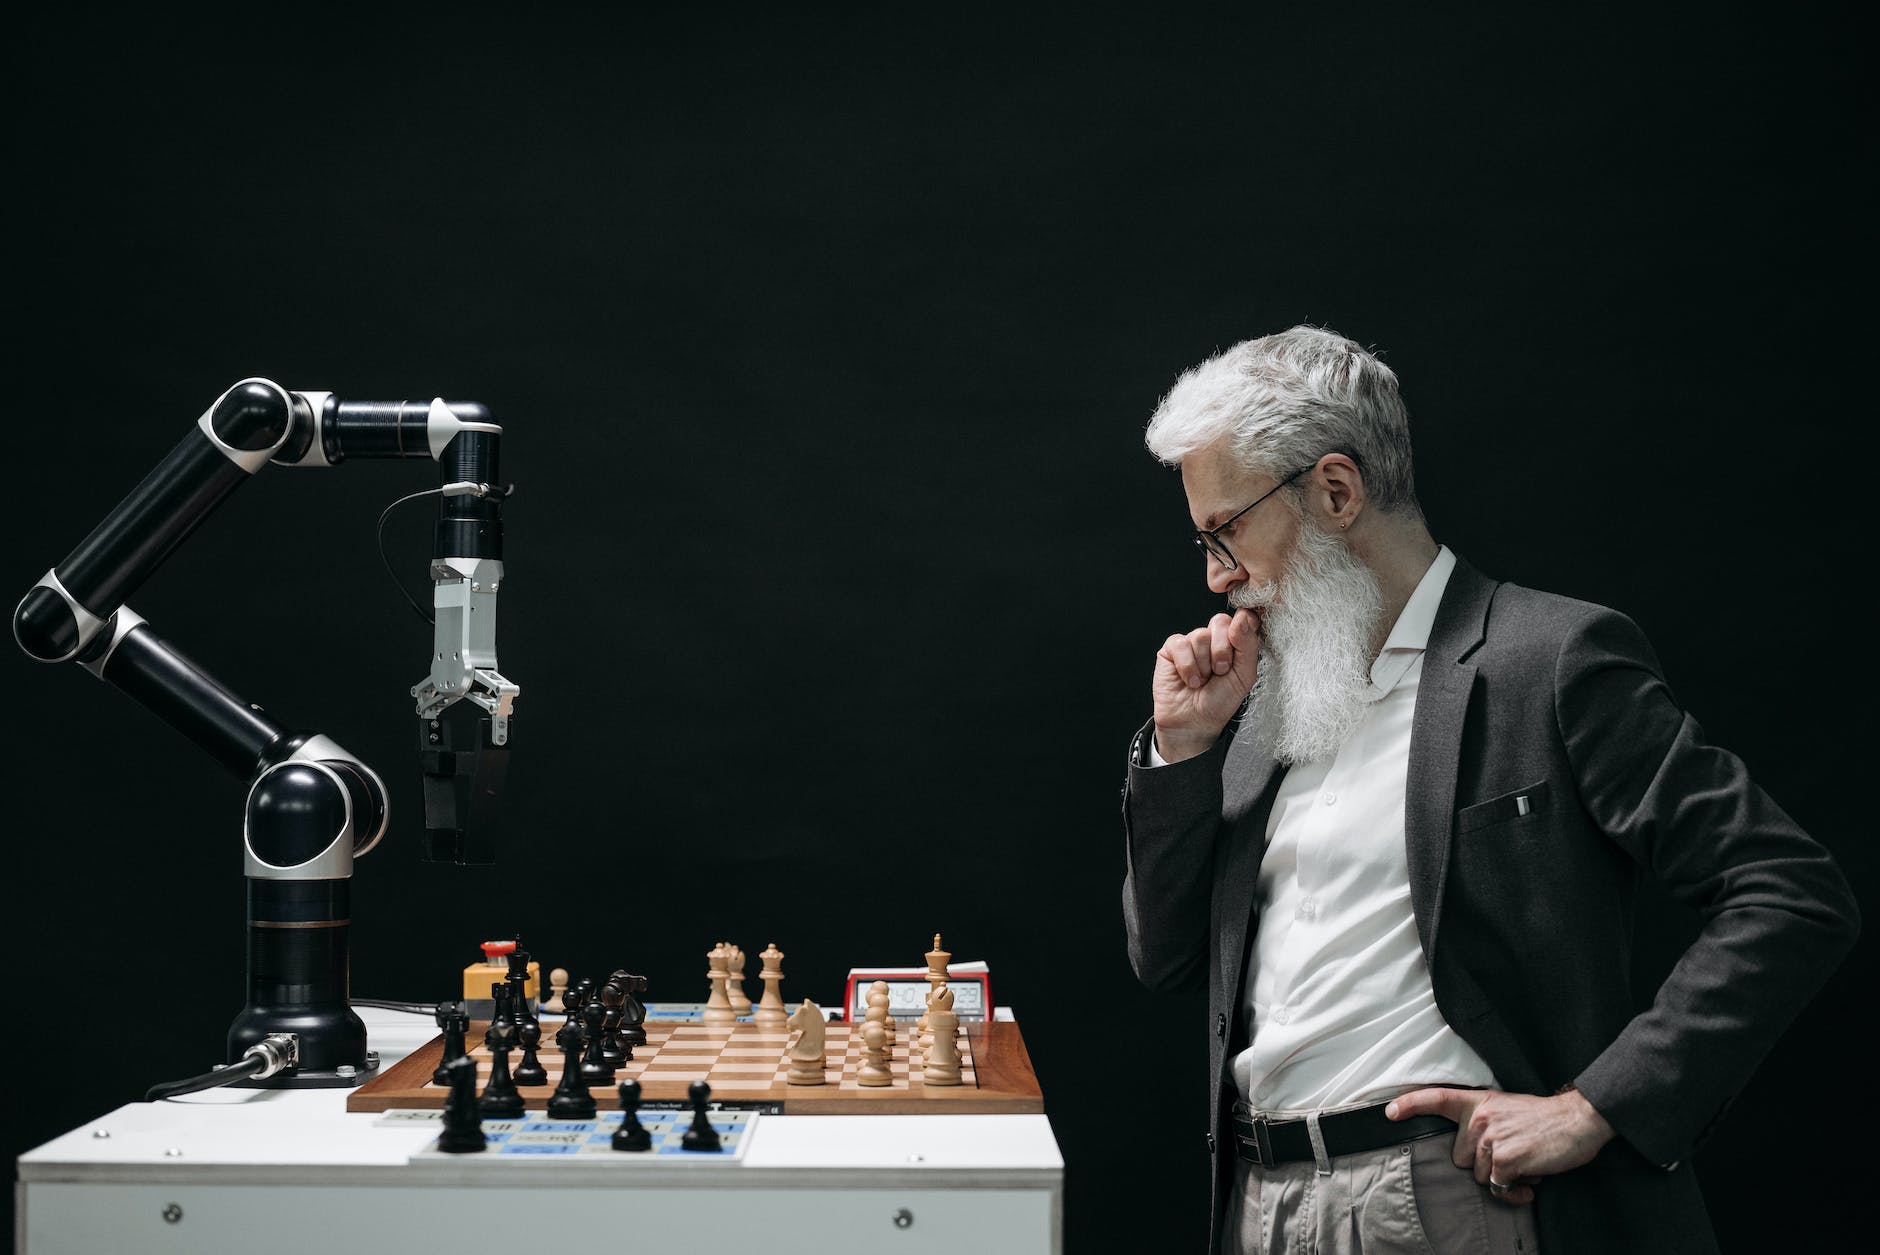 elderly man thinking while looking at a chessboard , 2023 predictions